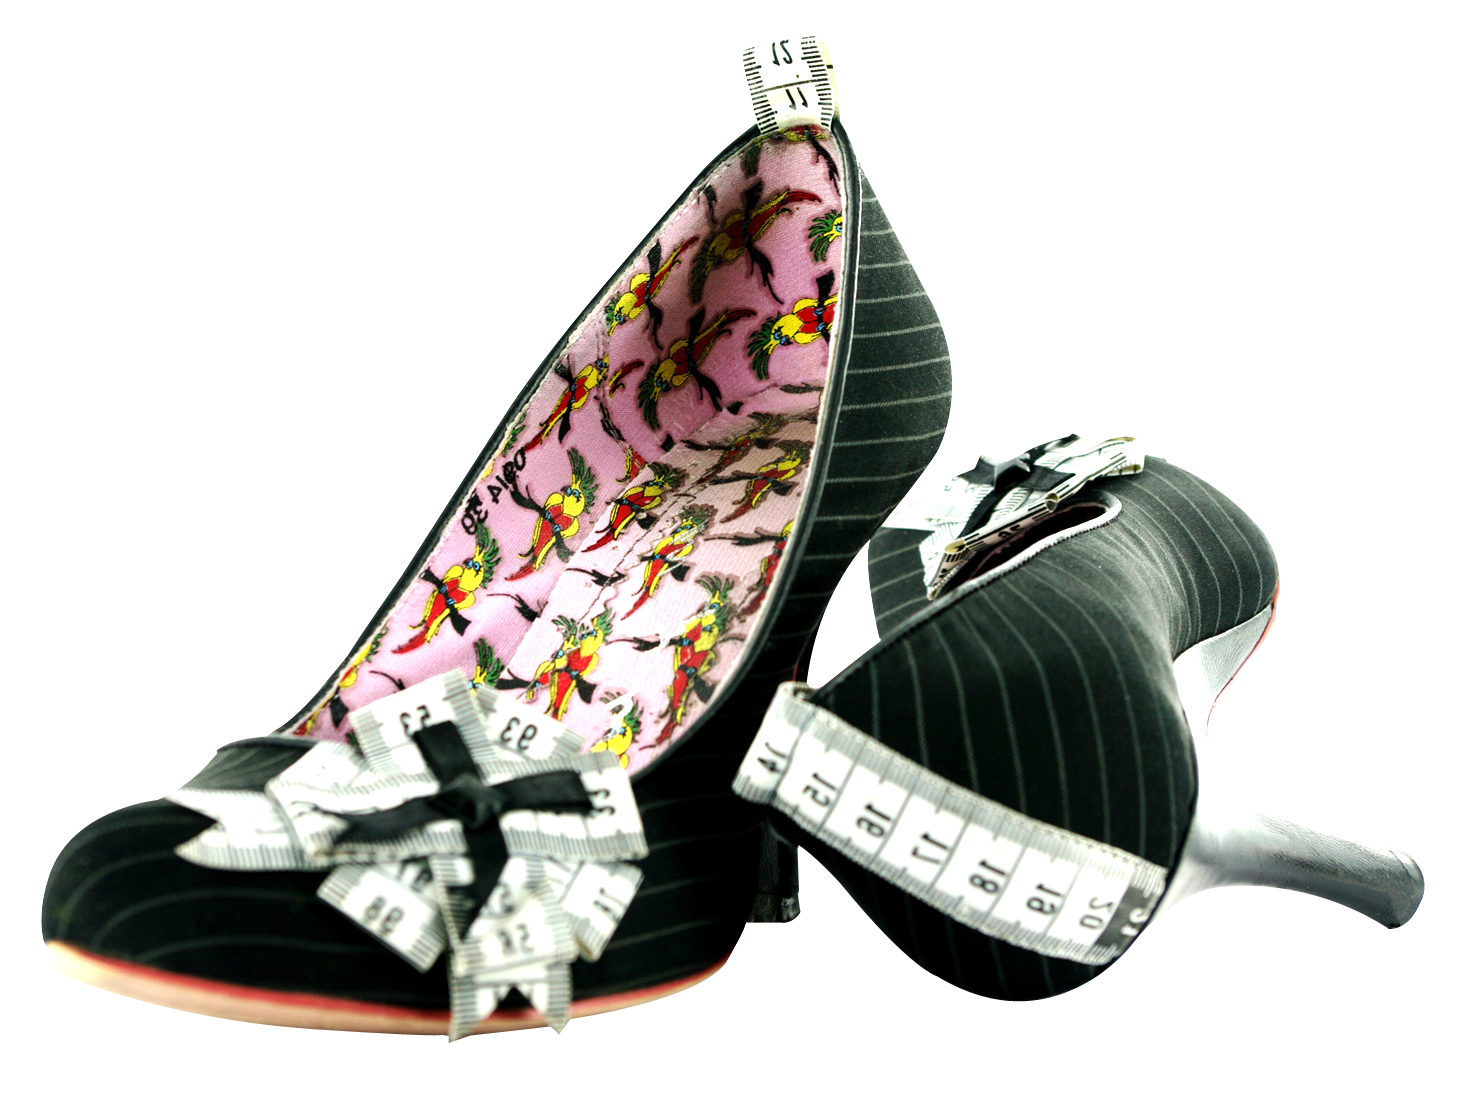 A Pair Of High Heeled Shoes With Tape Measure